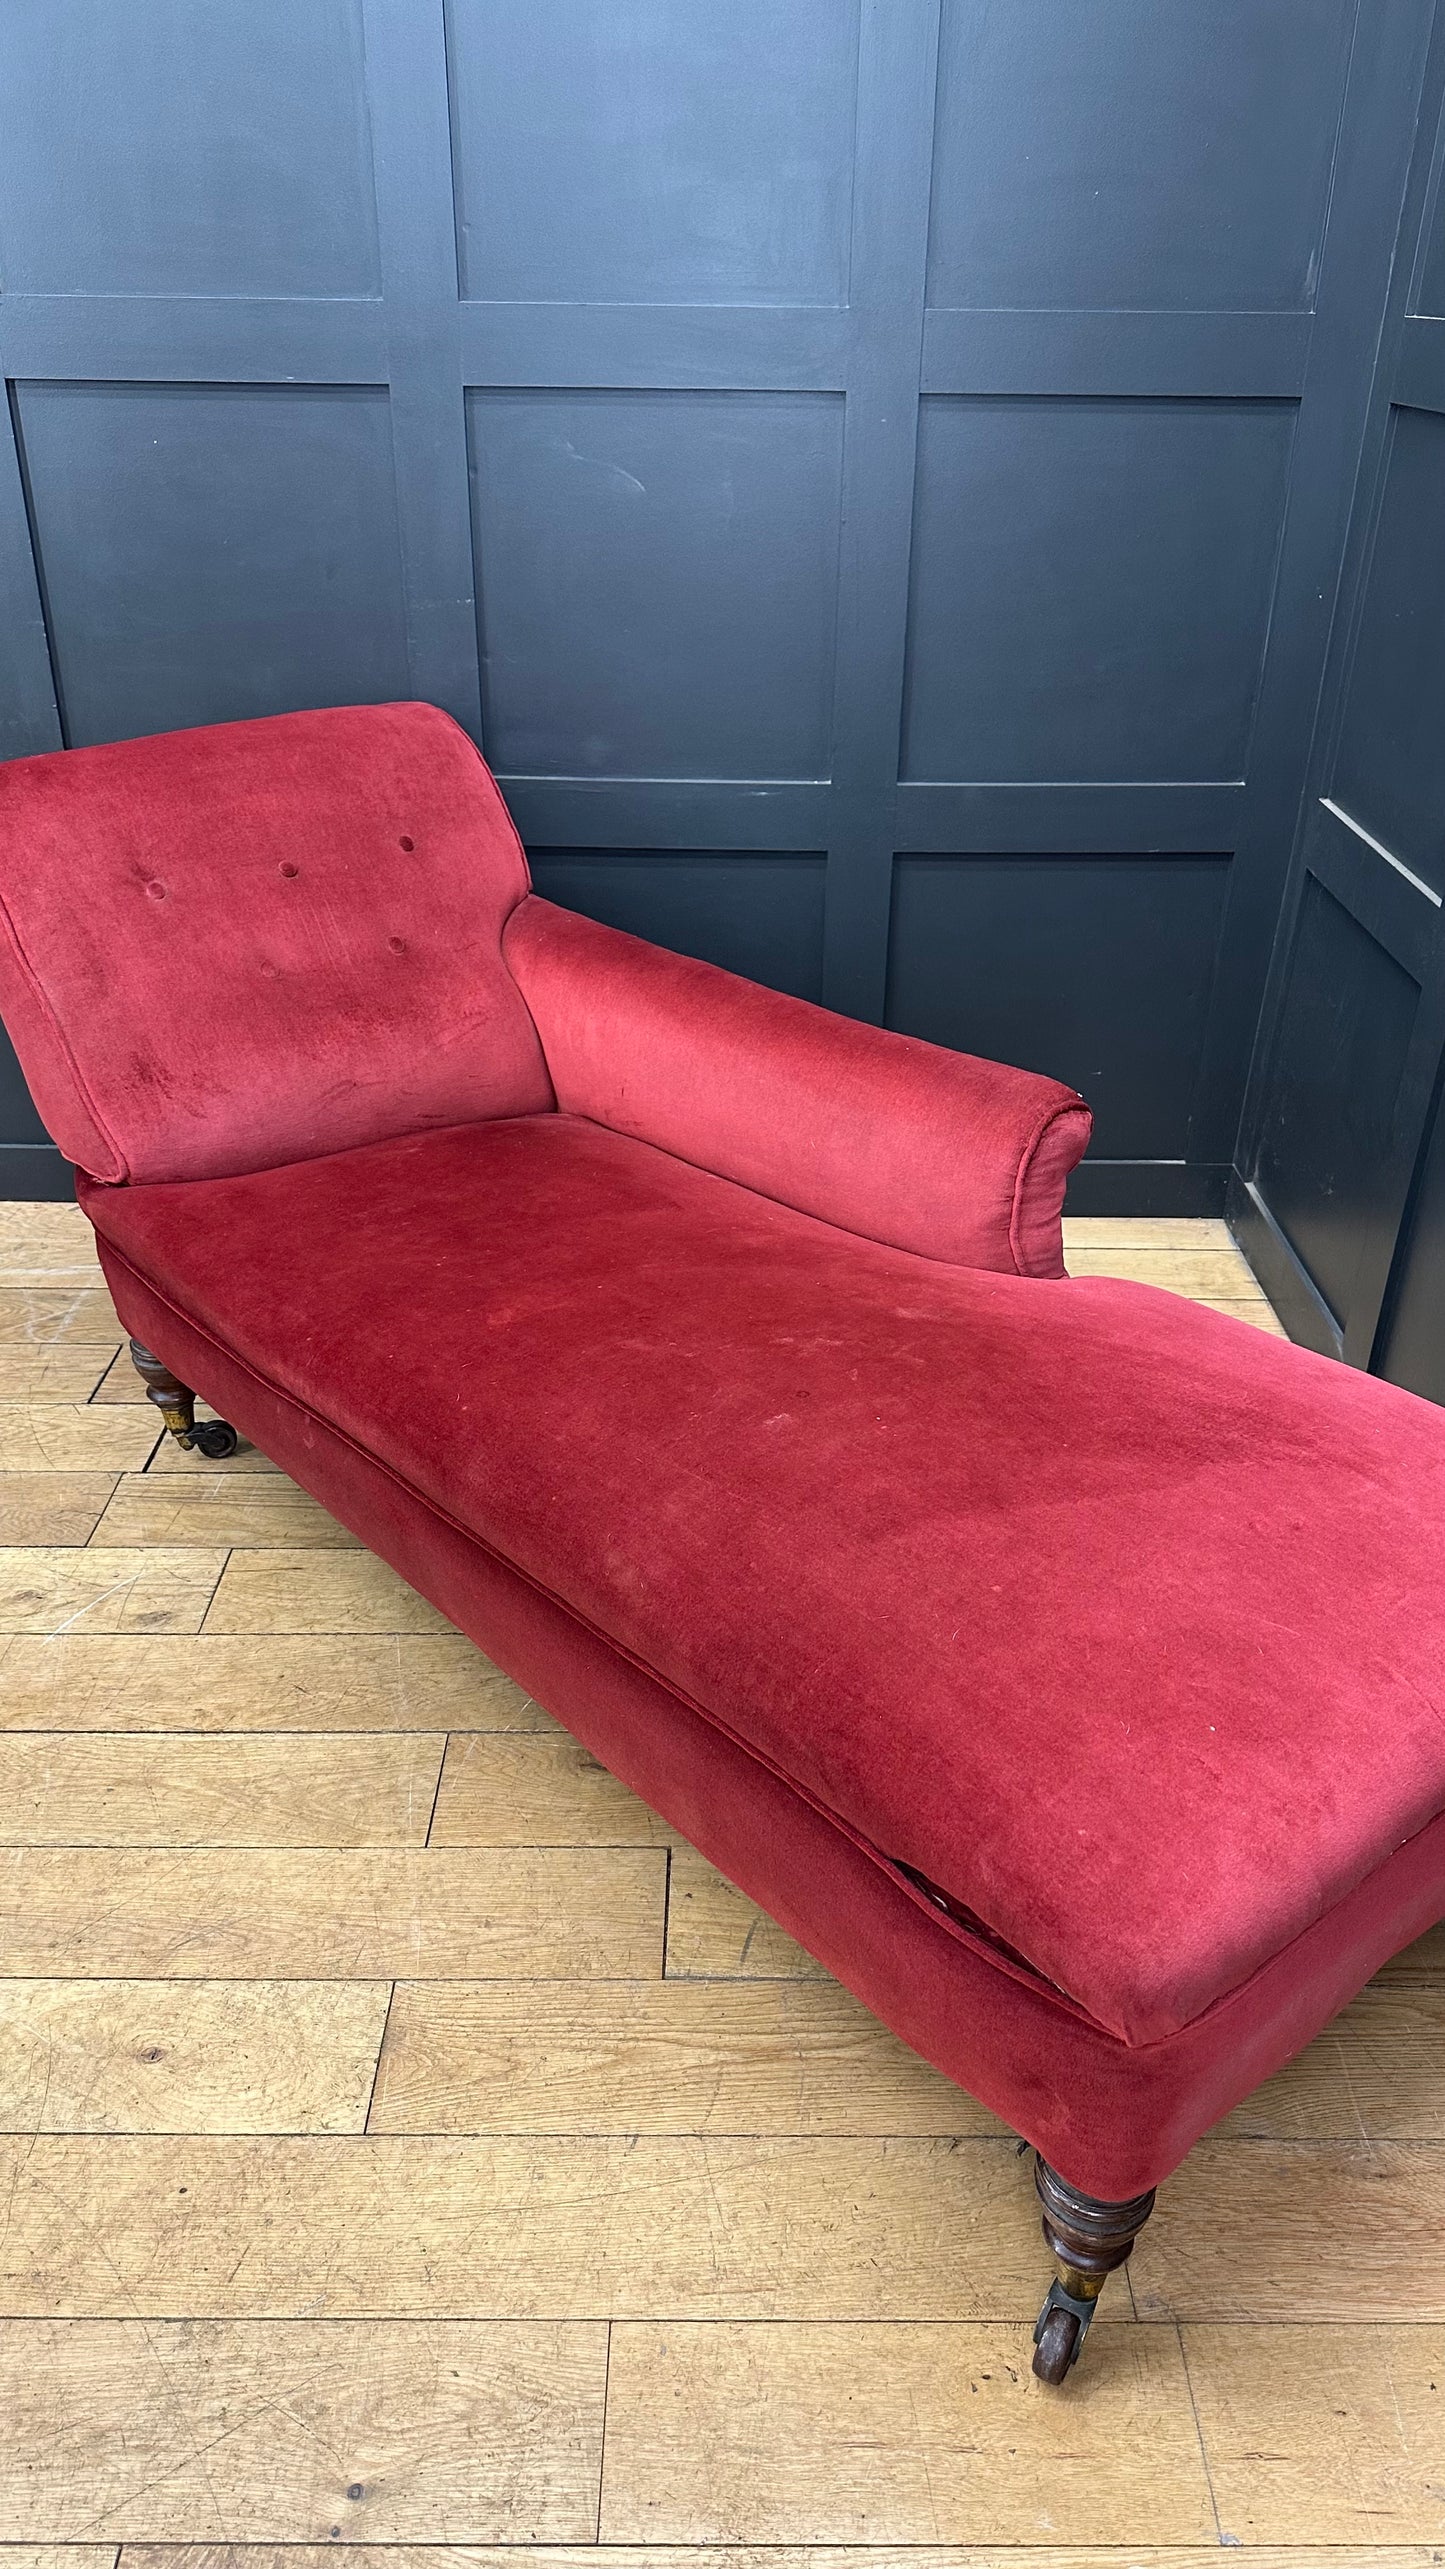 Antique Chaise Longue  / Antique Day Bed / Mahogany Frame Sofa /Victorian Chaise